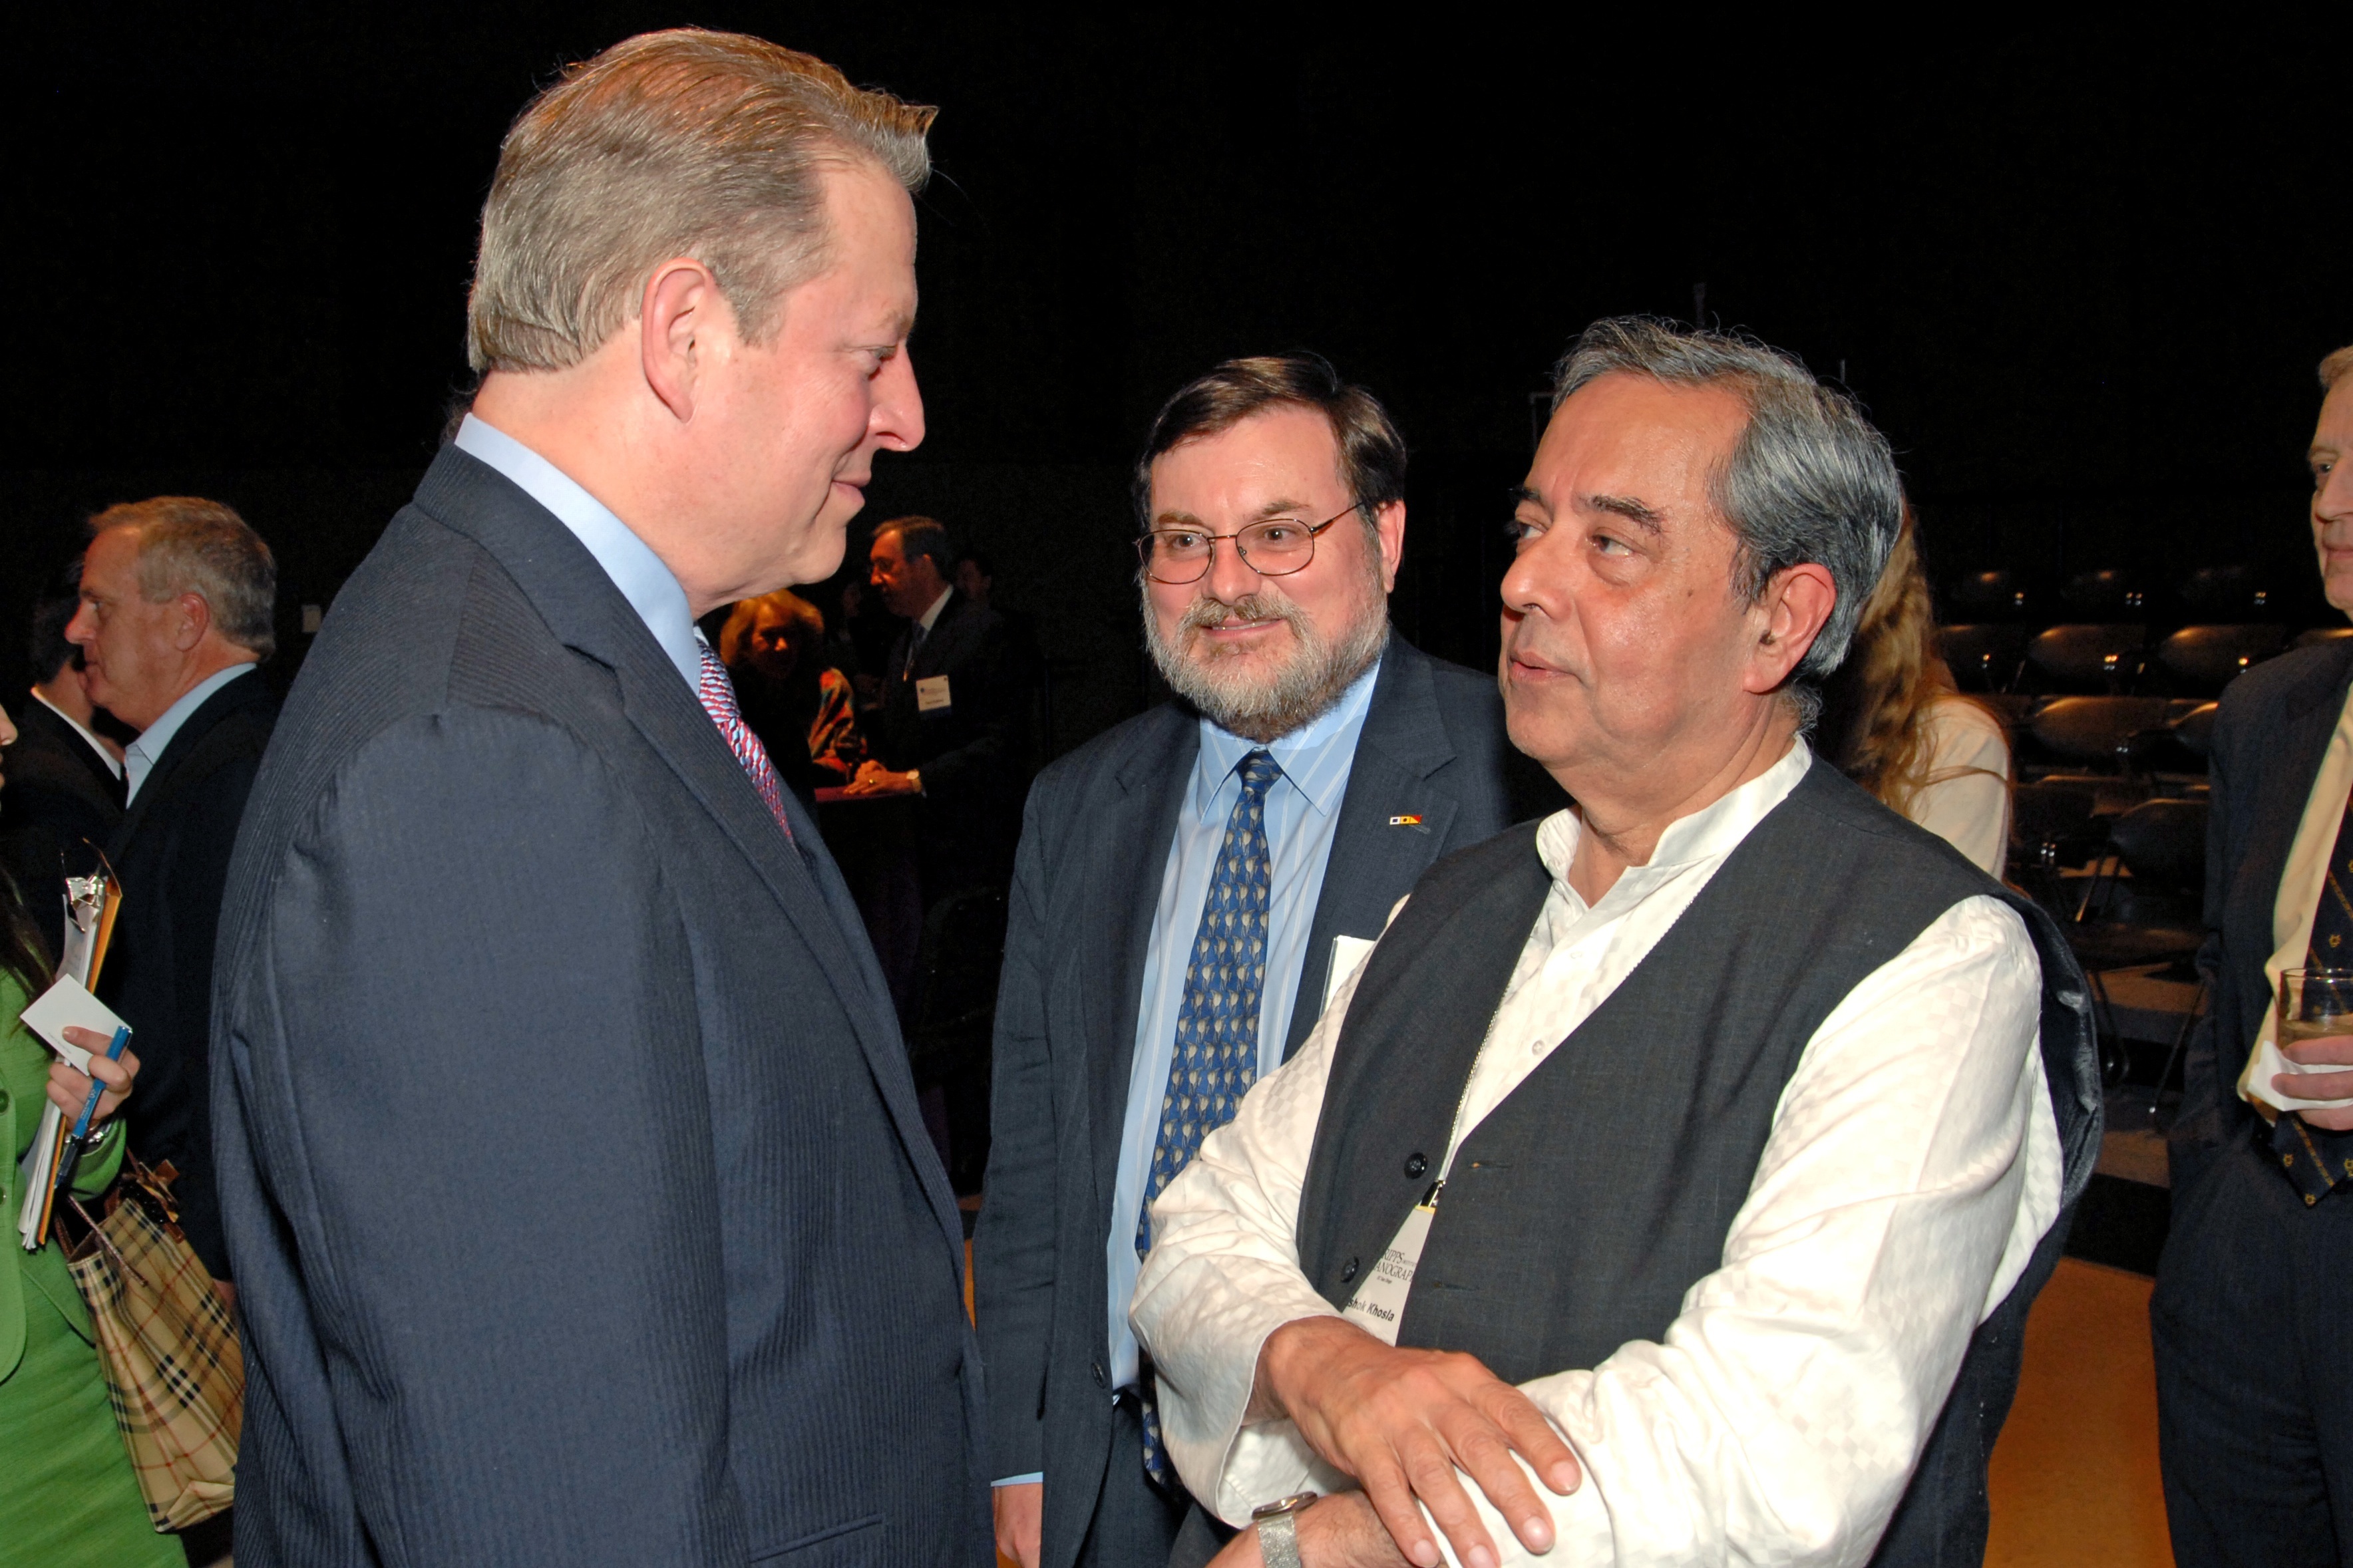 AK and Al Gore at Roger Revelle's 100th Anniversary 2.jpg